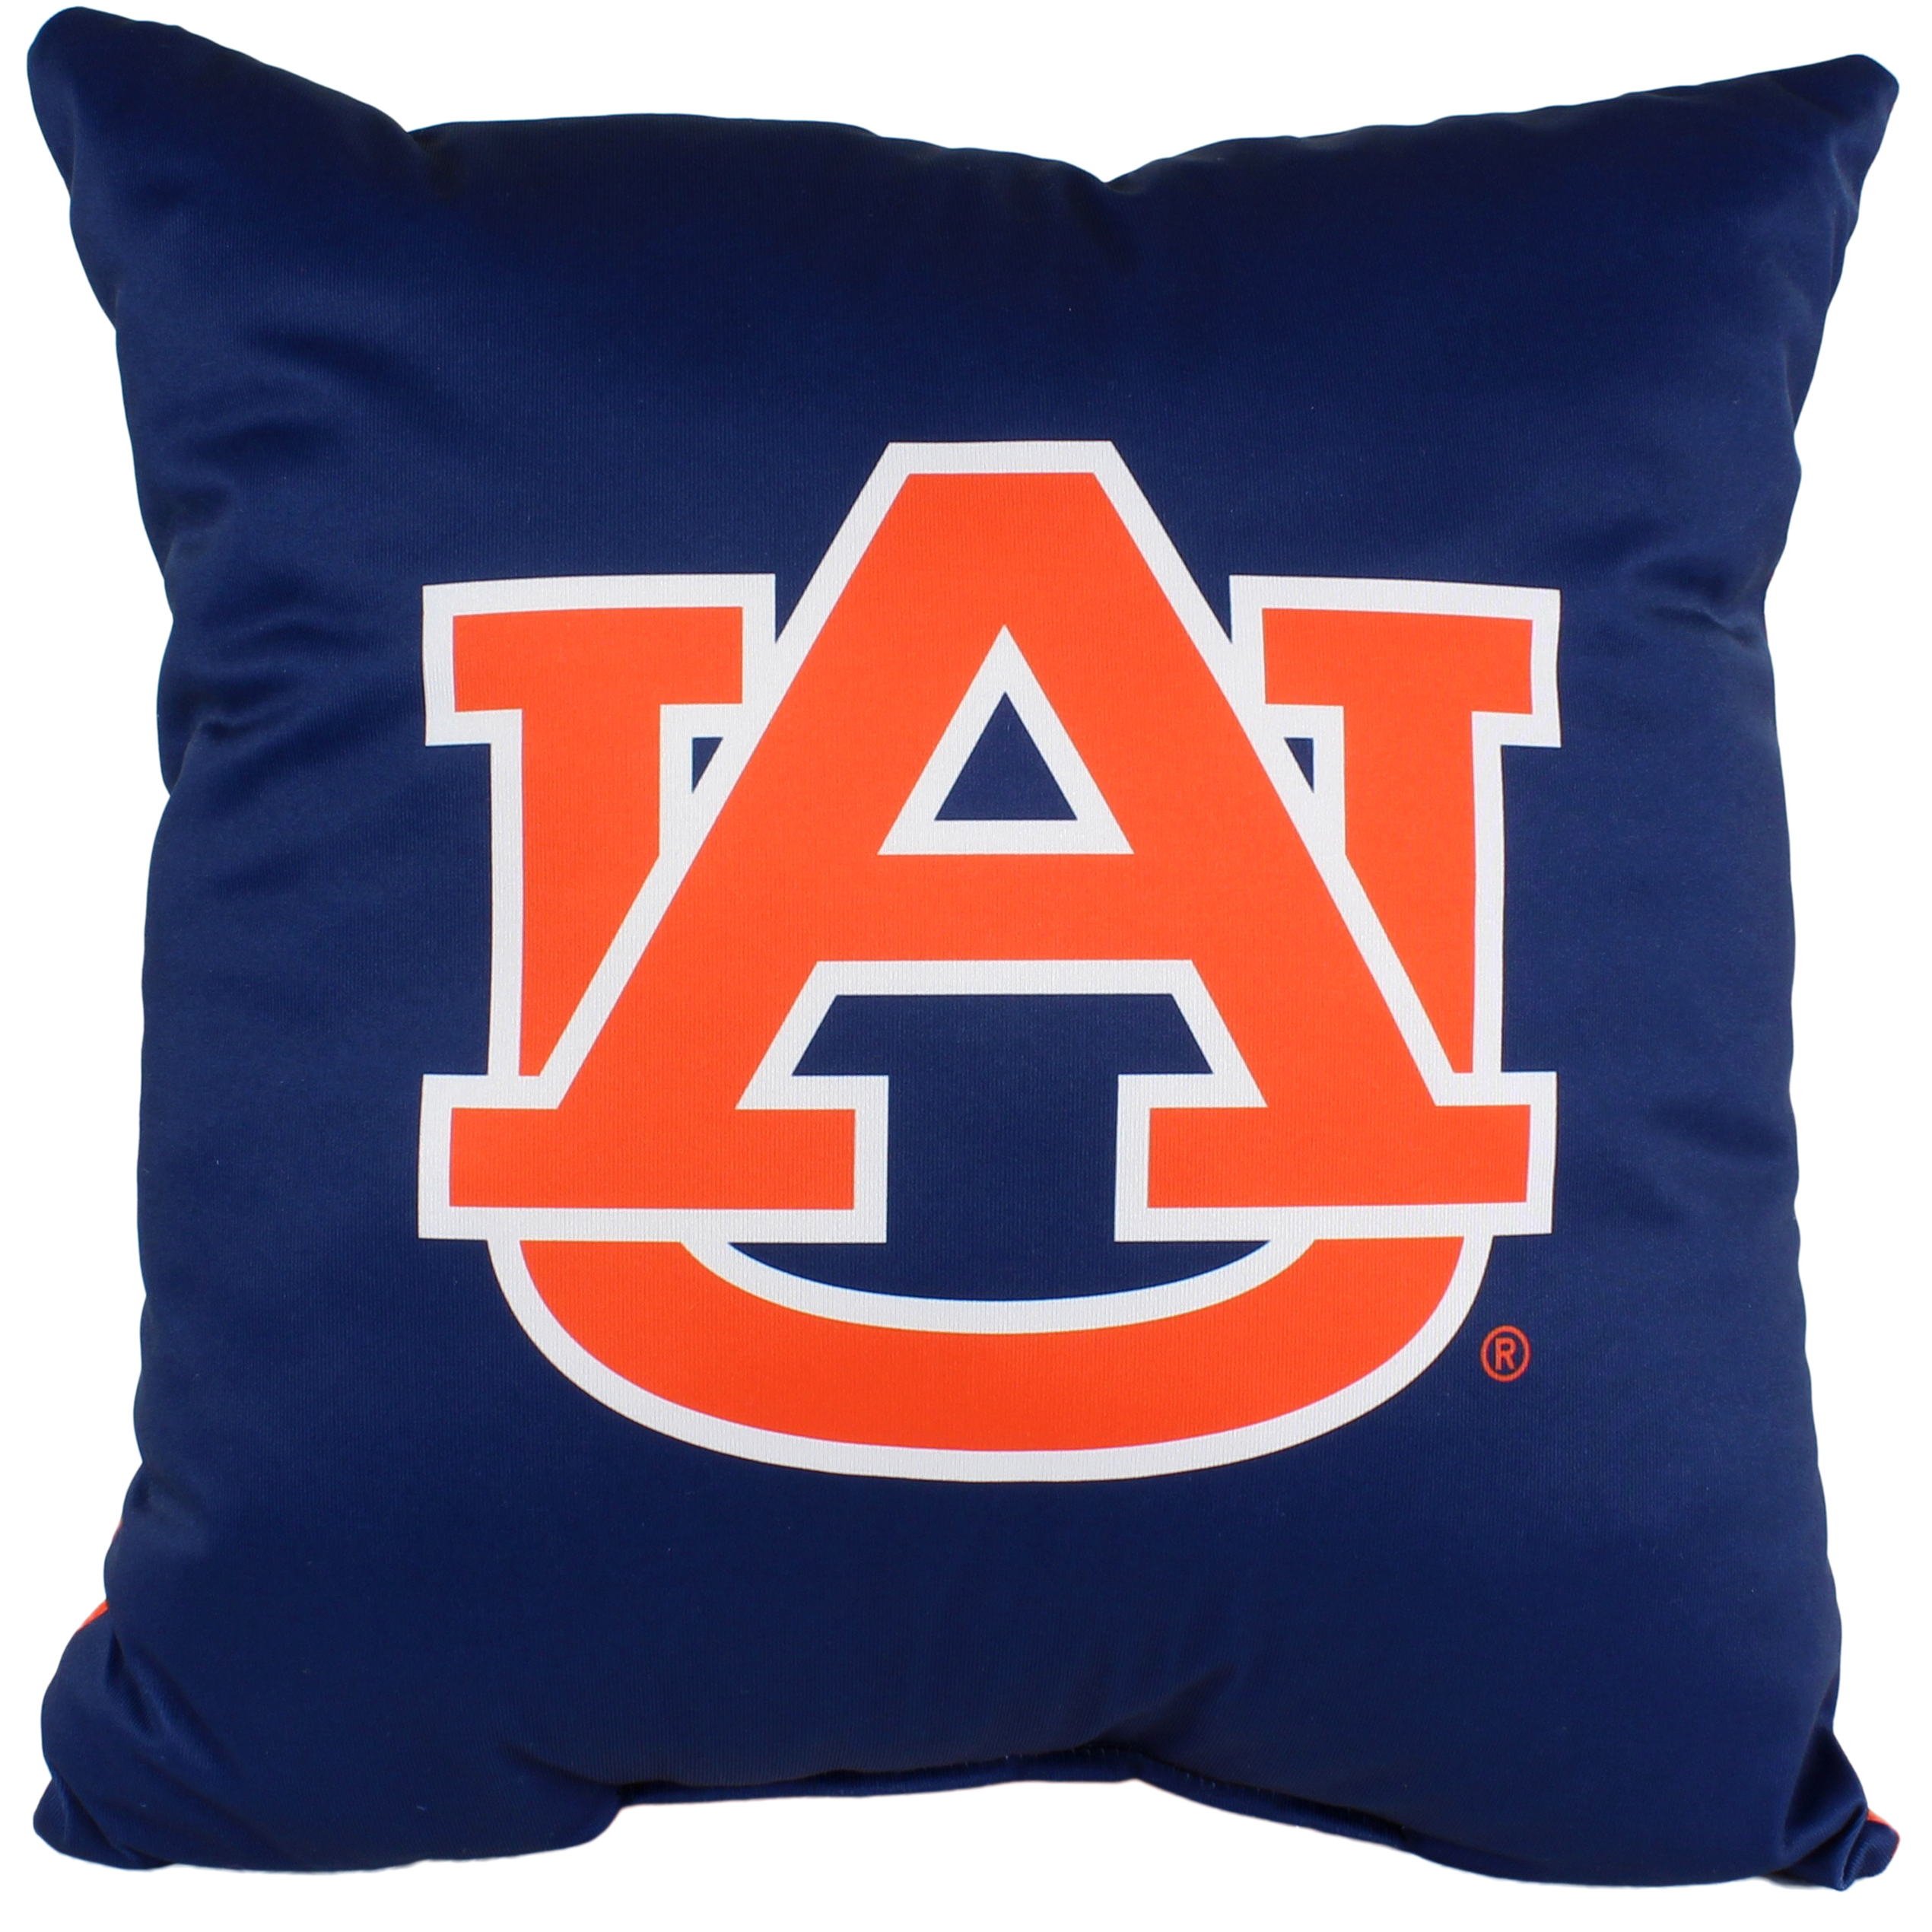 Auburn Tigers 16 inch Reversible Decorative Pillow - image 1 of 4